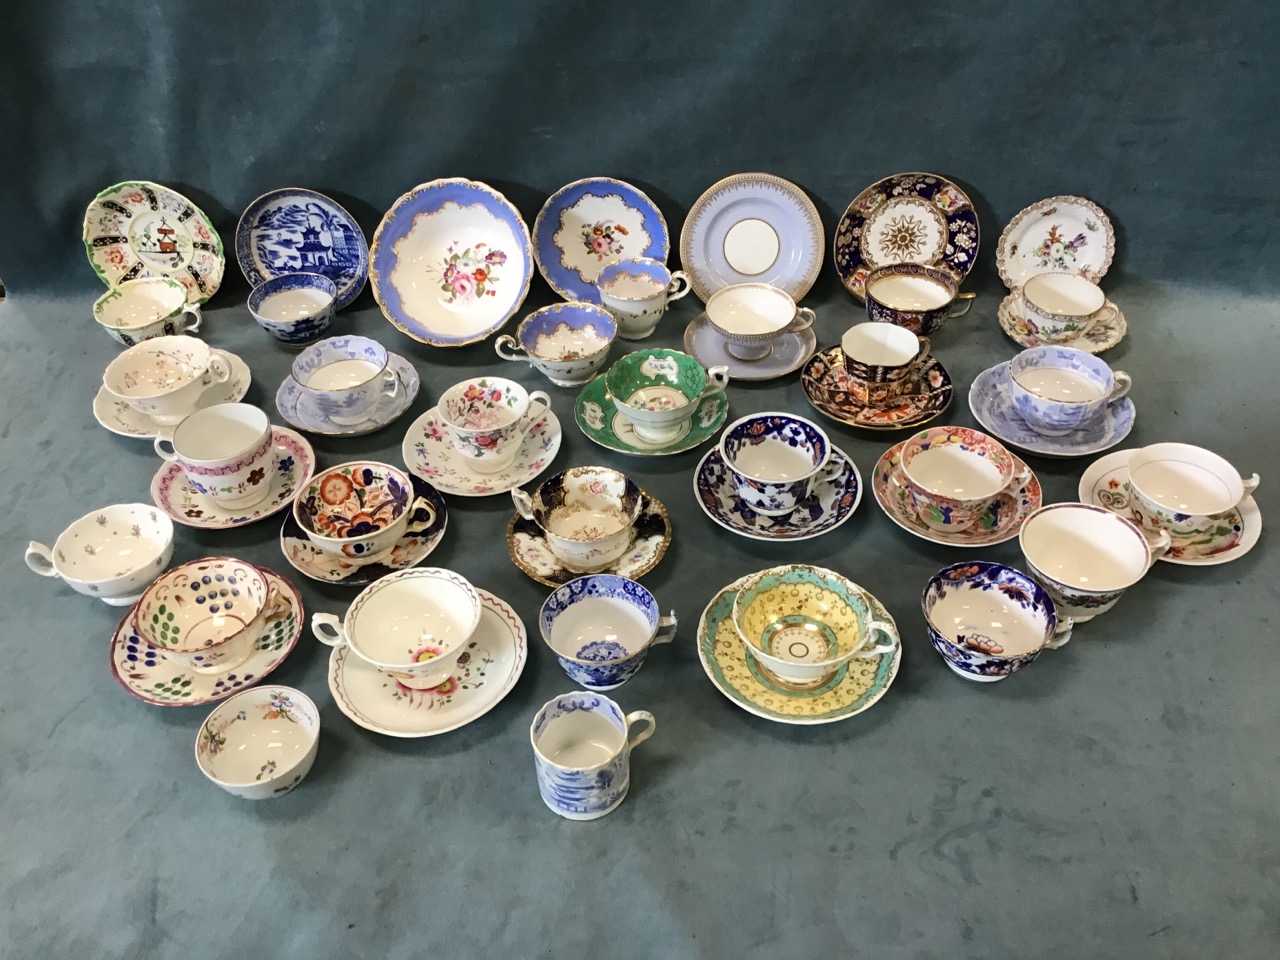 A collection of 18th and 19th century porcelain tea wares - New Hall, Spode Feldspar, Hilditch,